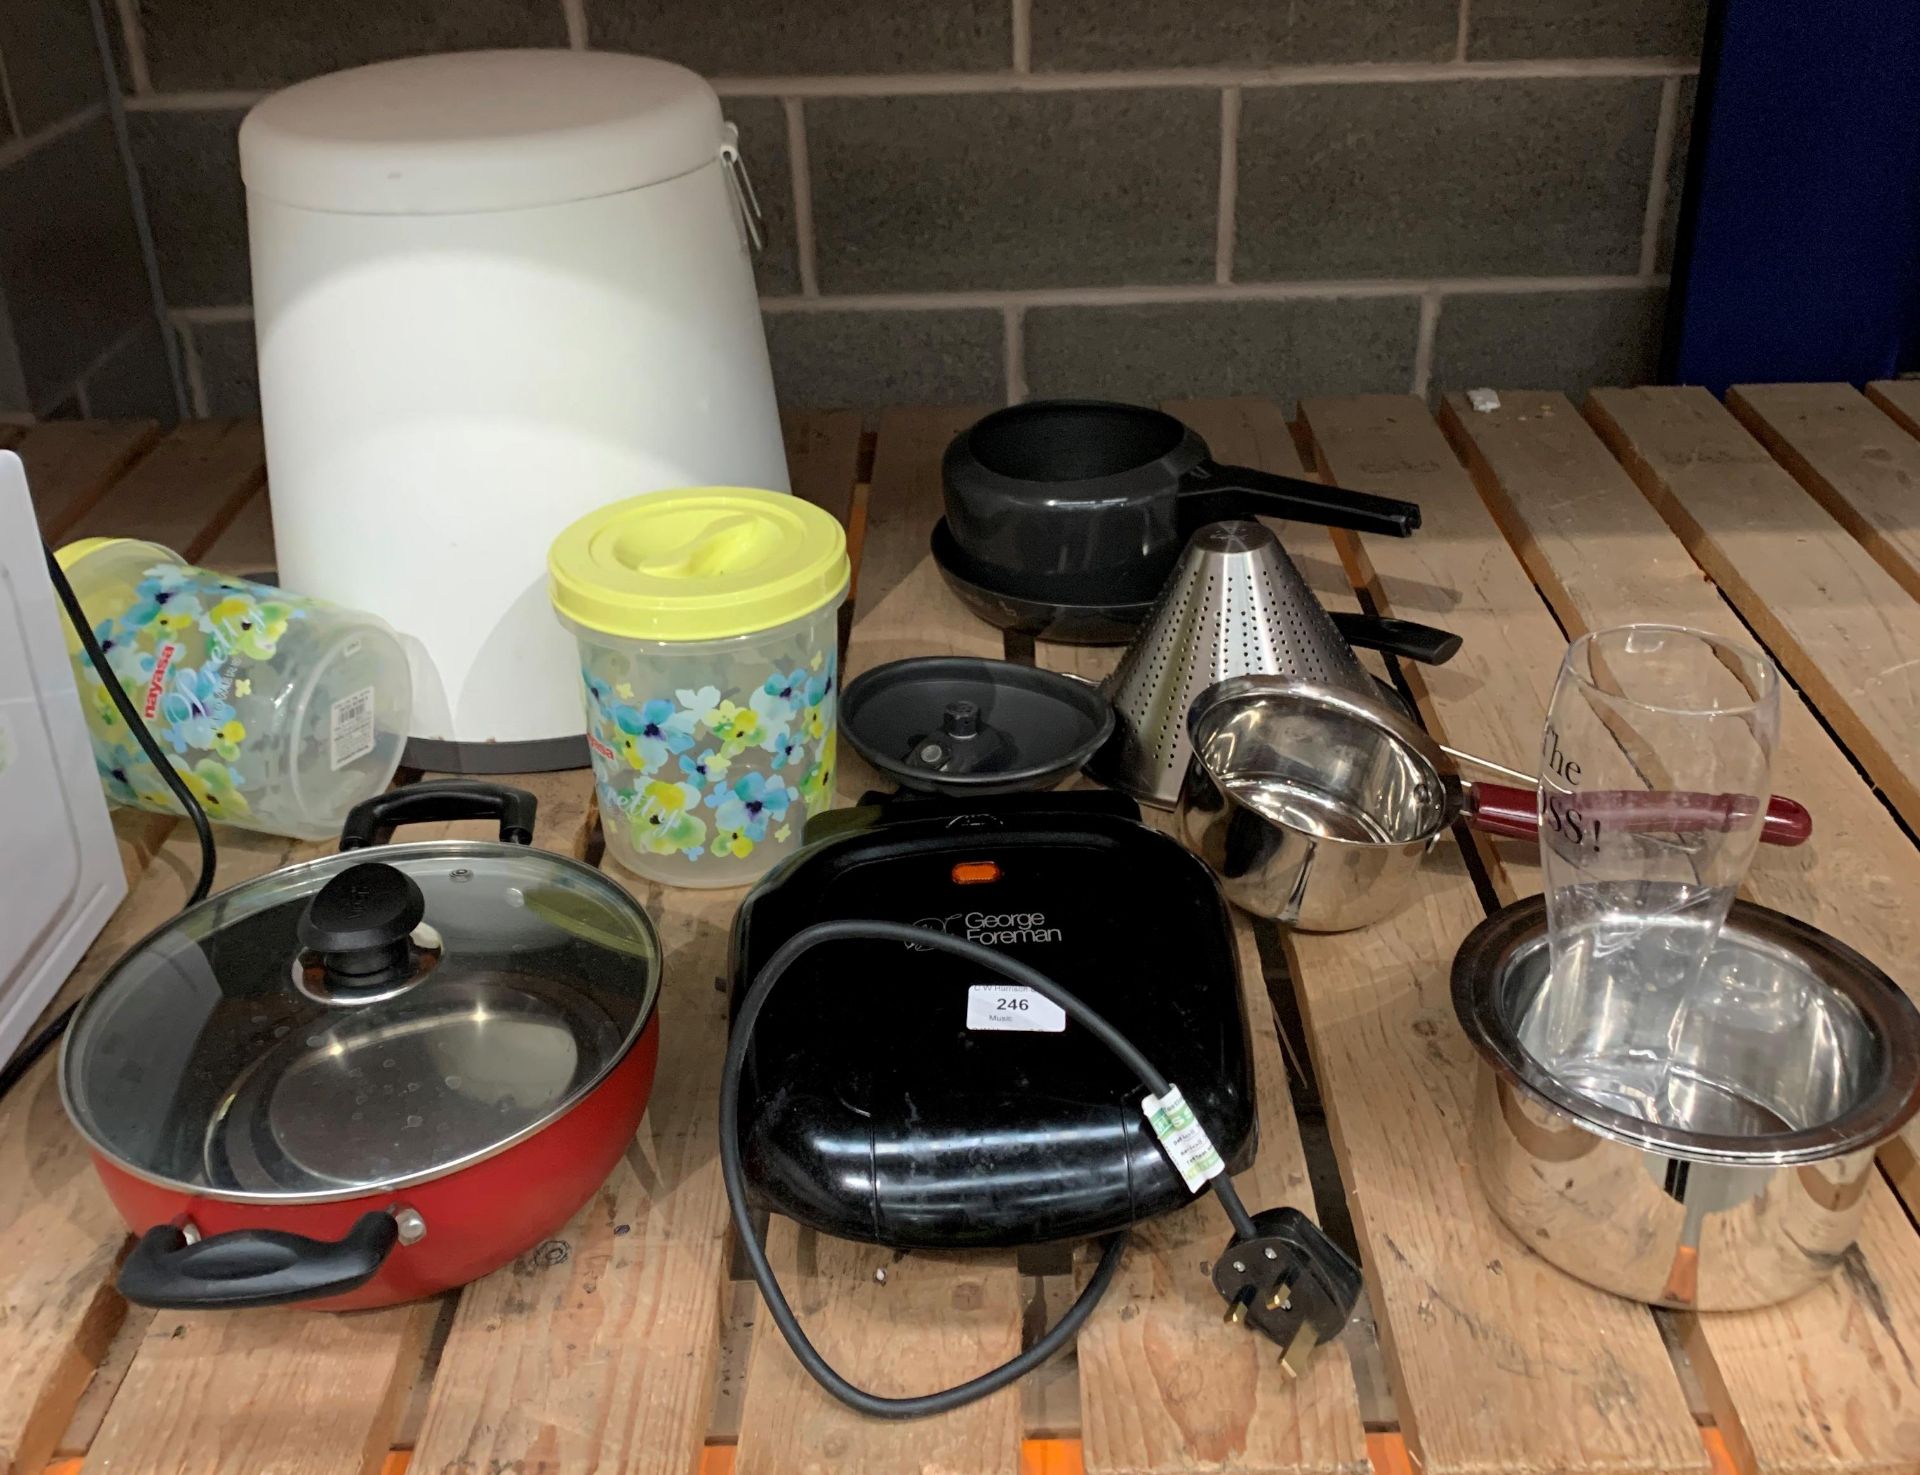 George Foreman grill machine, storage containers, frying pan, cooking pots, waste bin,